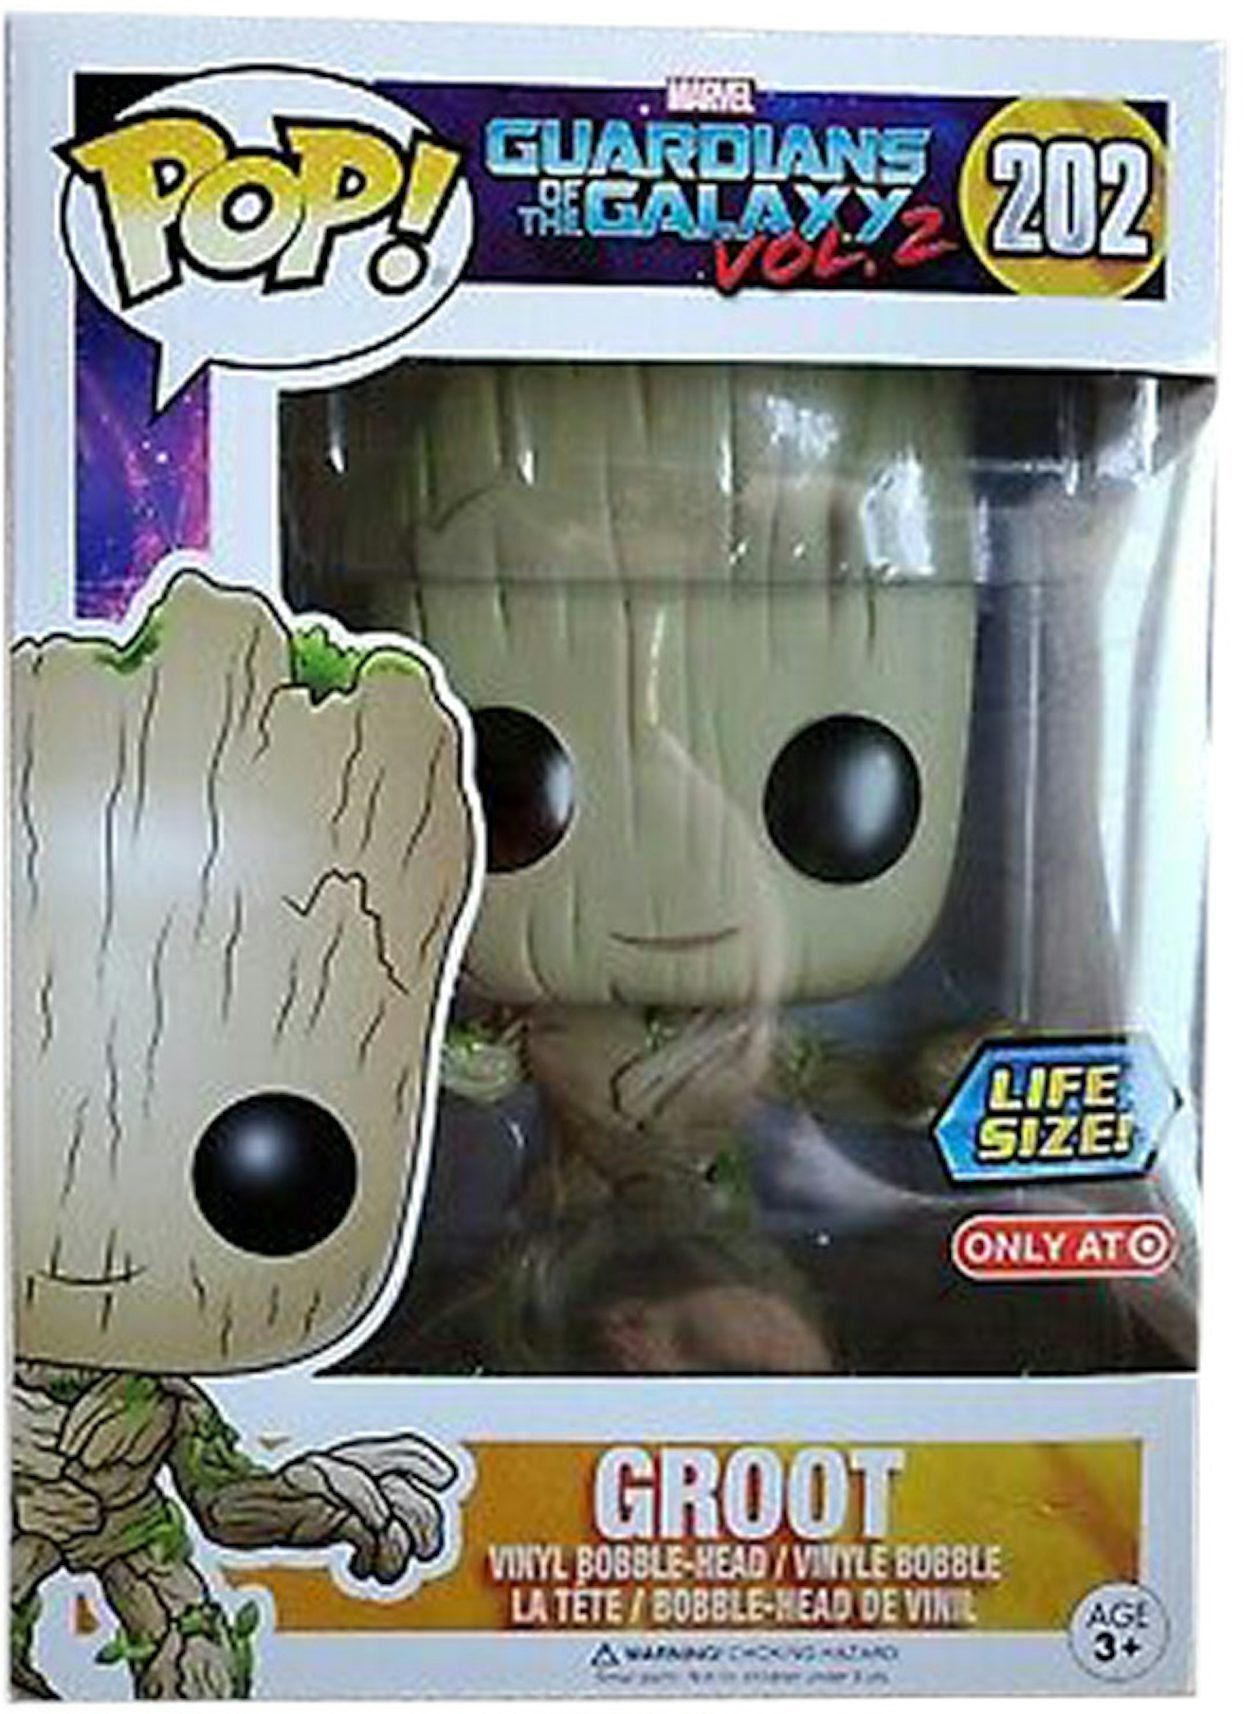 Funko Pop! Marvel Guardians of the Galaxy Vol. 2 Groot (Life Size) Target  Exclusive Bobble-Head #202